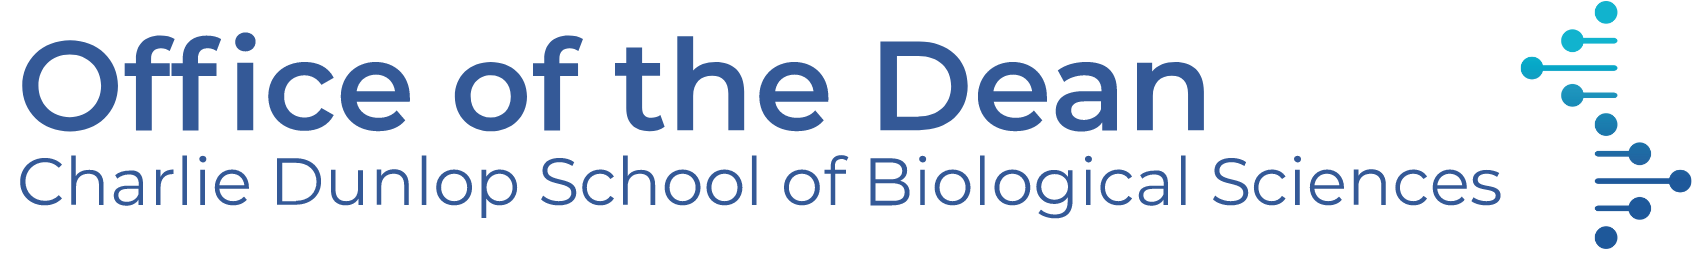 Dunlop School Office of the Dean Logo with gradient DNA